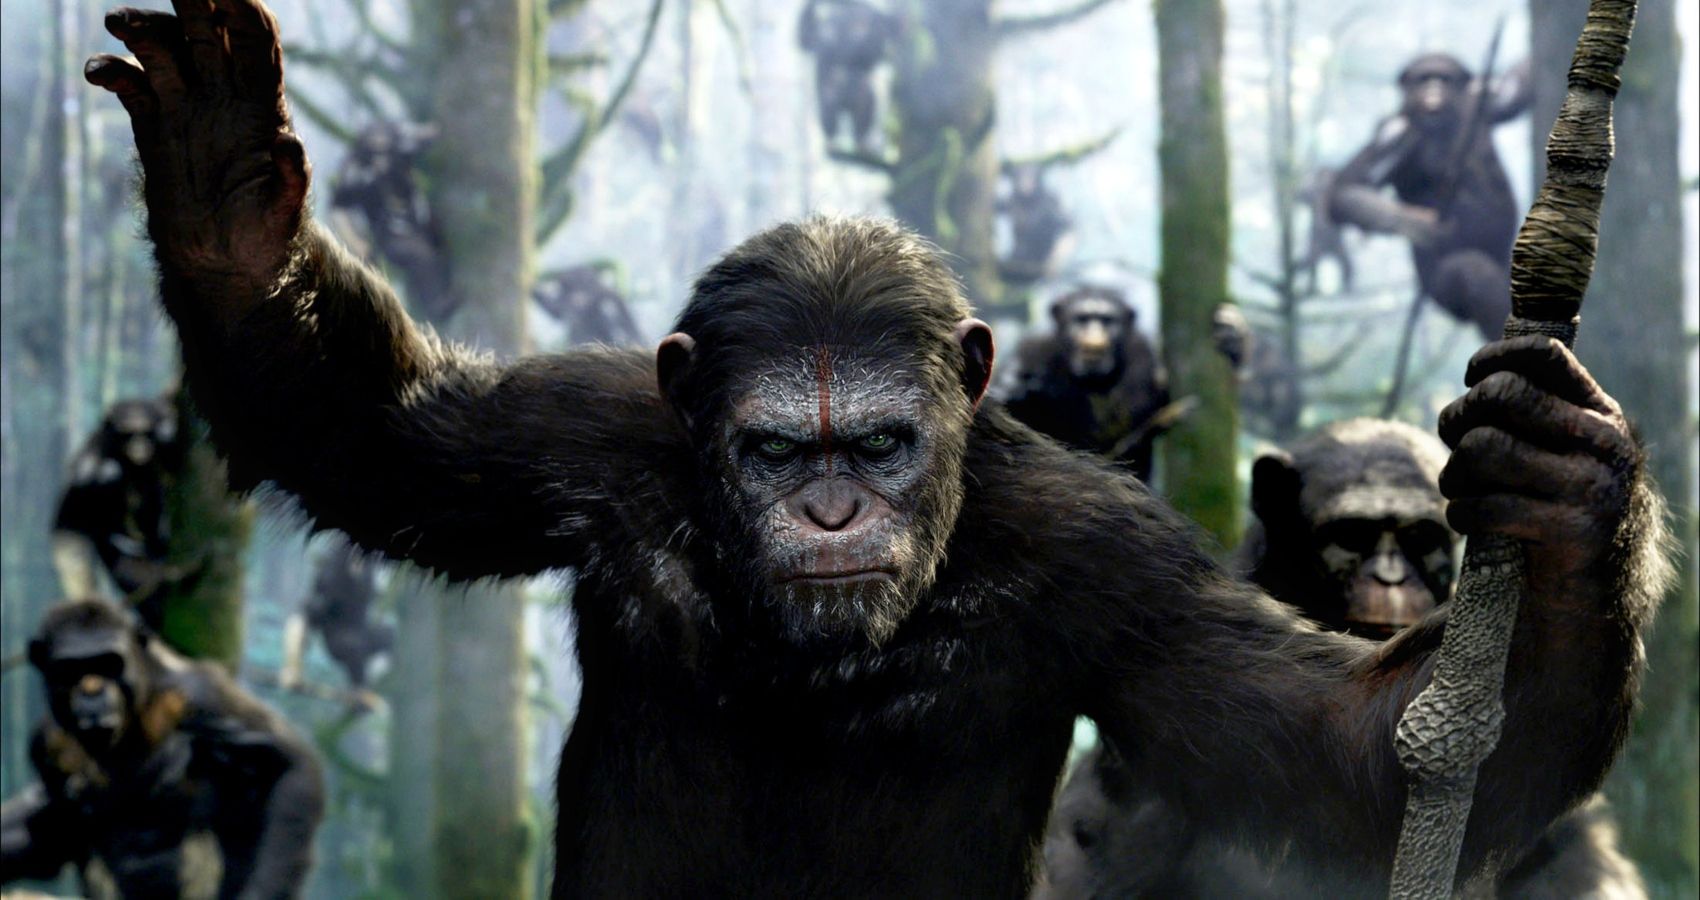 The Depiction of War and Humanity in Dawn of the Planet of the Apes